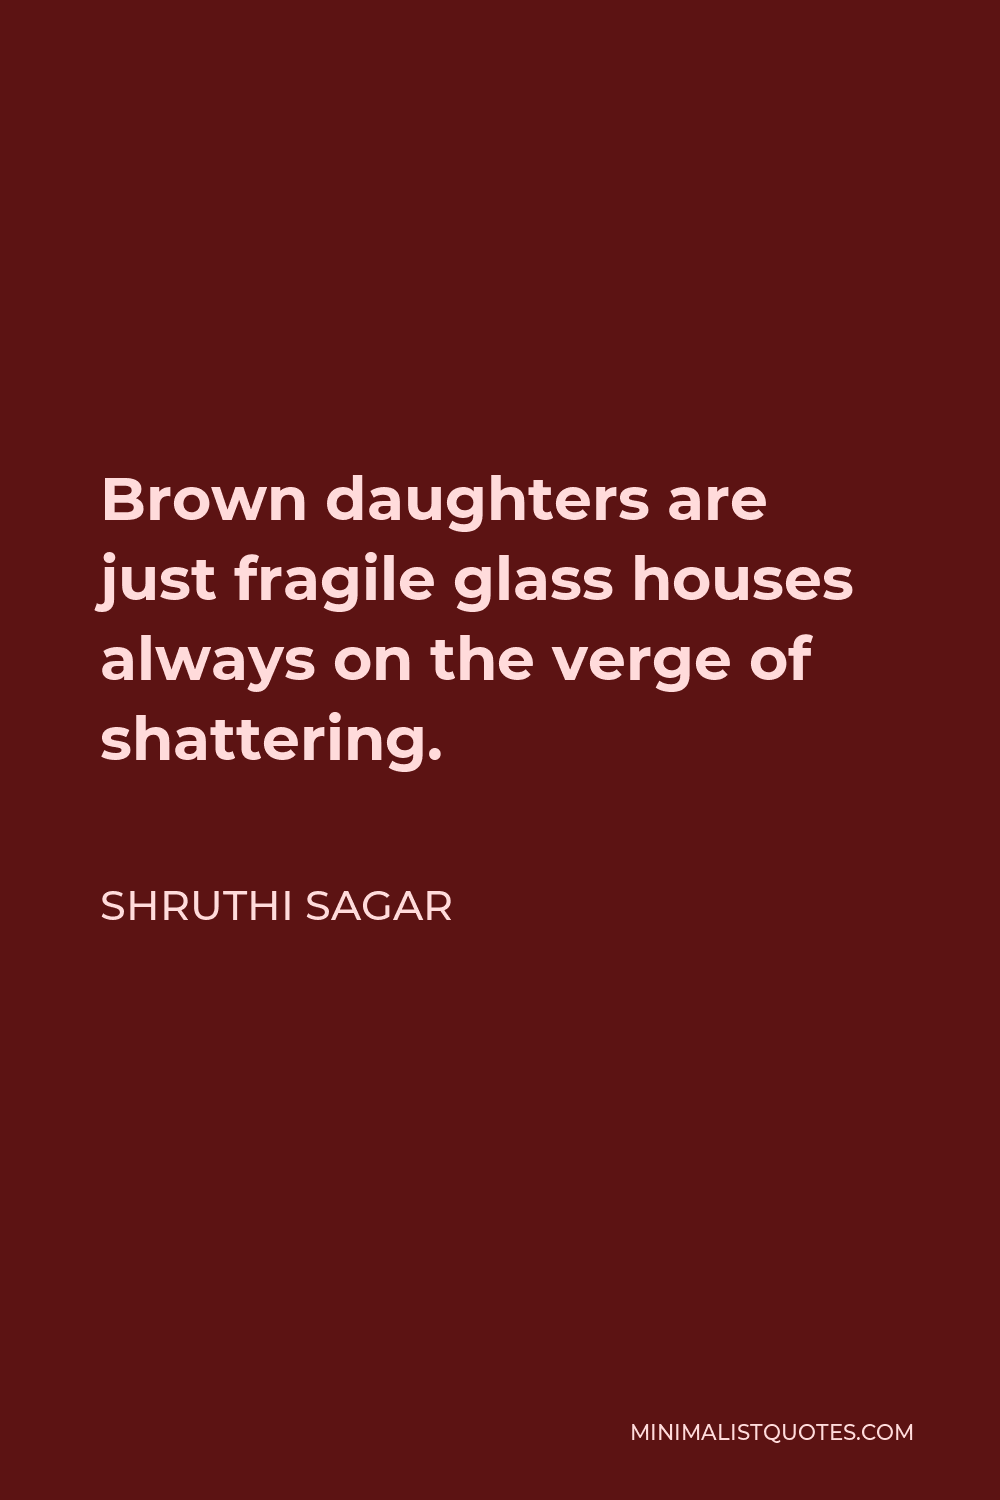 Shruthi Sagar Quote - Brown daughters are just fragile glass houses always on the verge of shattering.